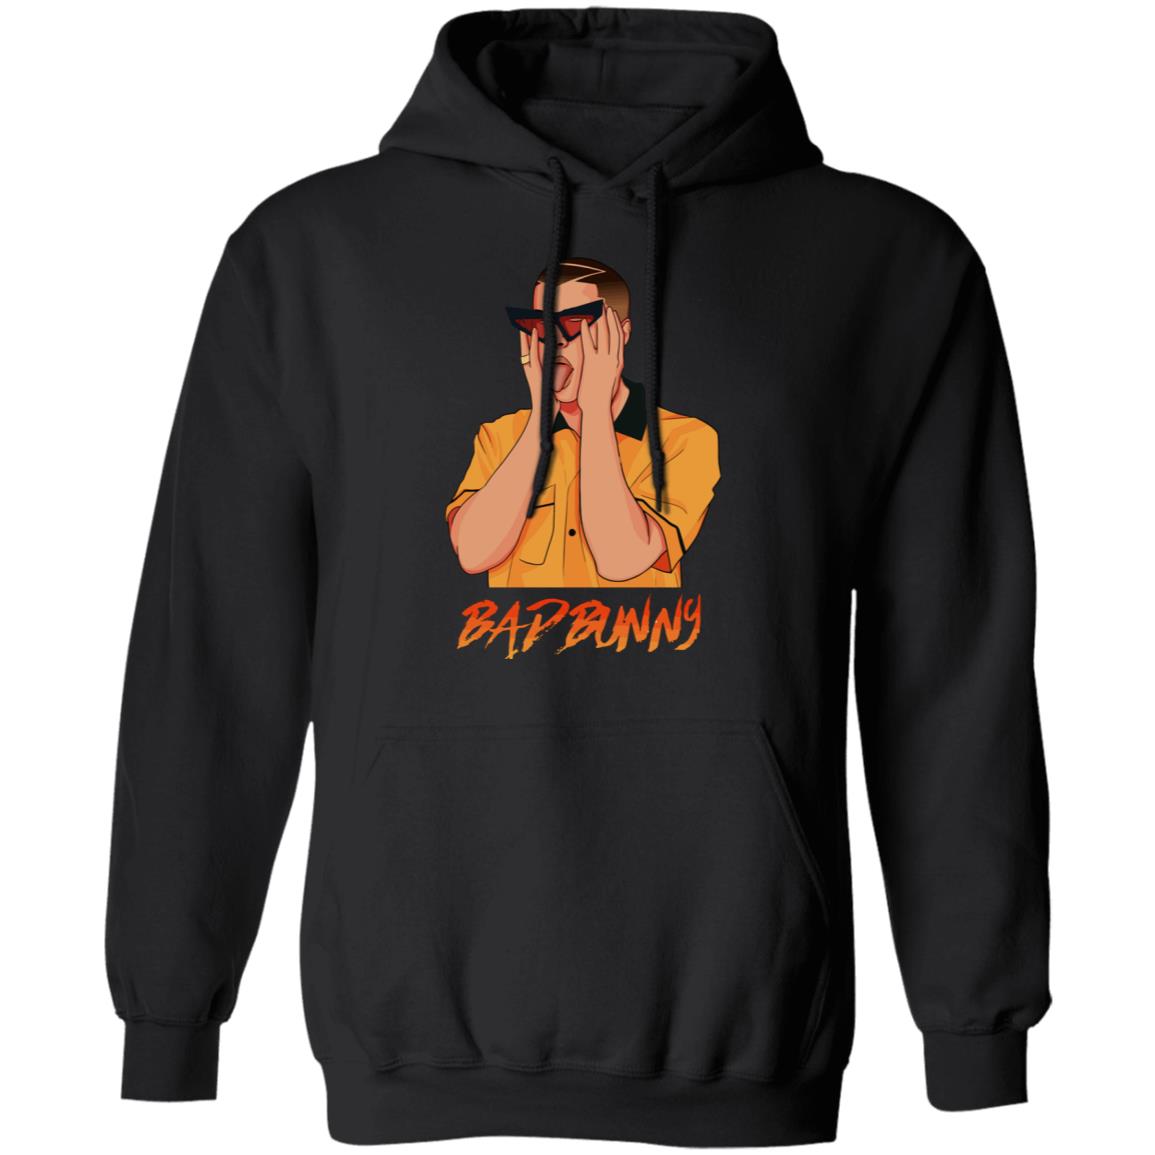 Comprehensive Features of Designer Hoodies or T-Shirts